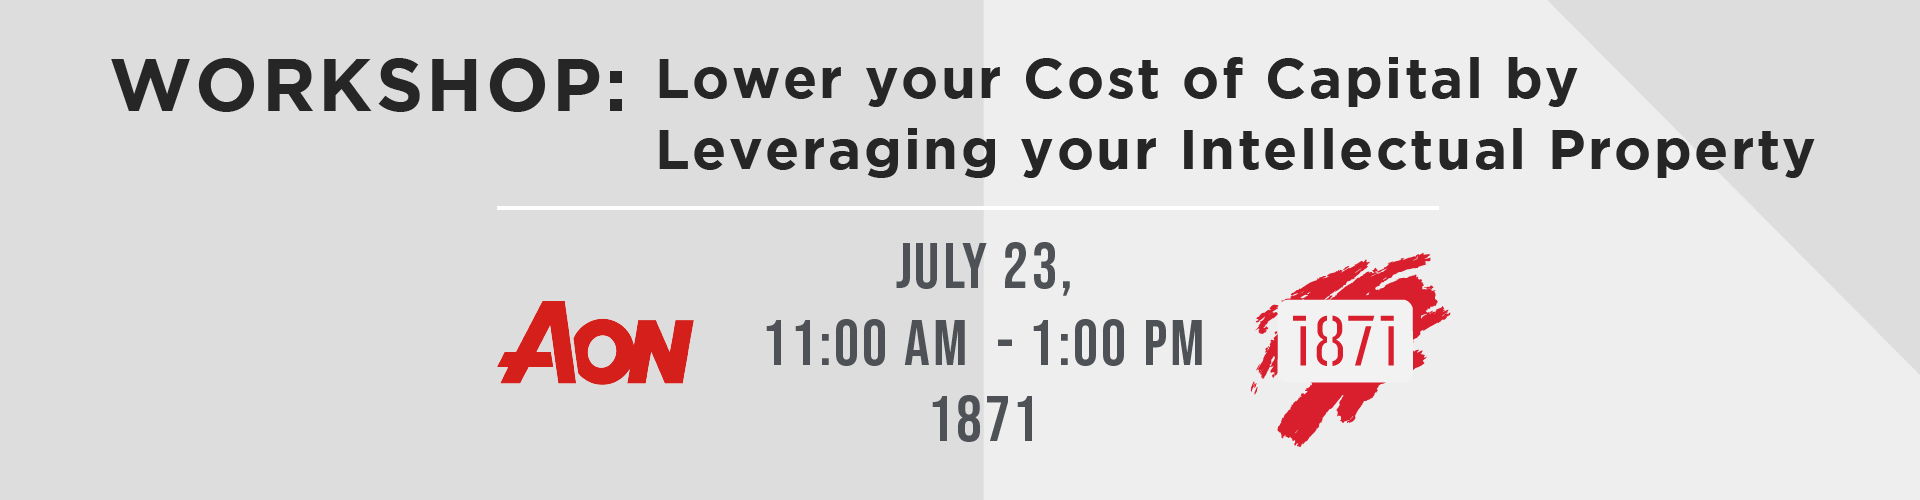 Learn to Lower Your Cost of Capital by Leveraging IP